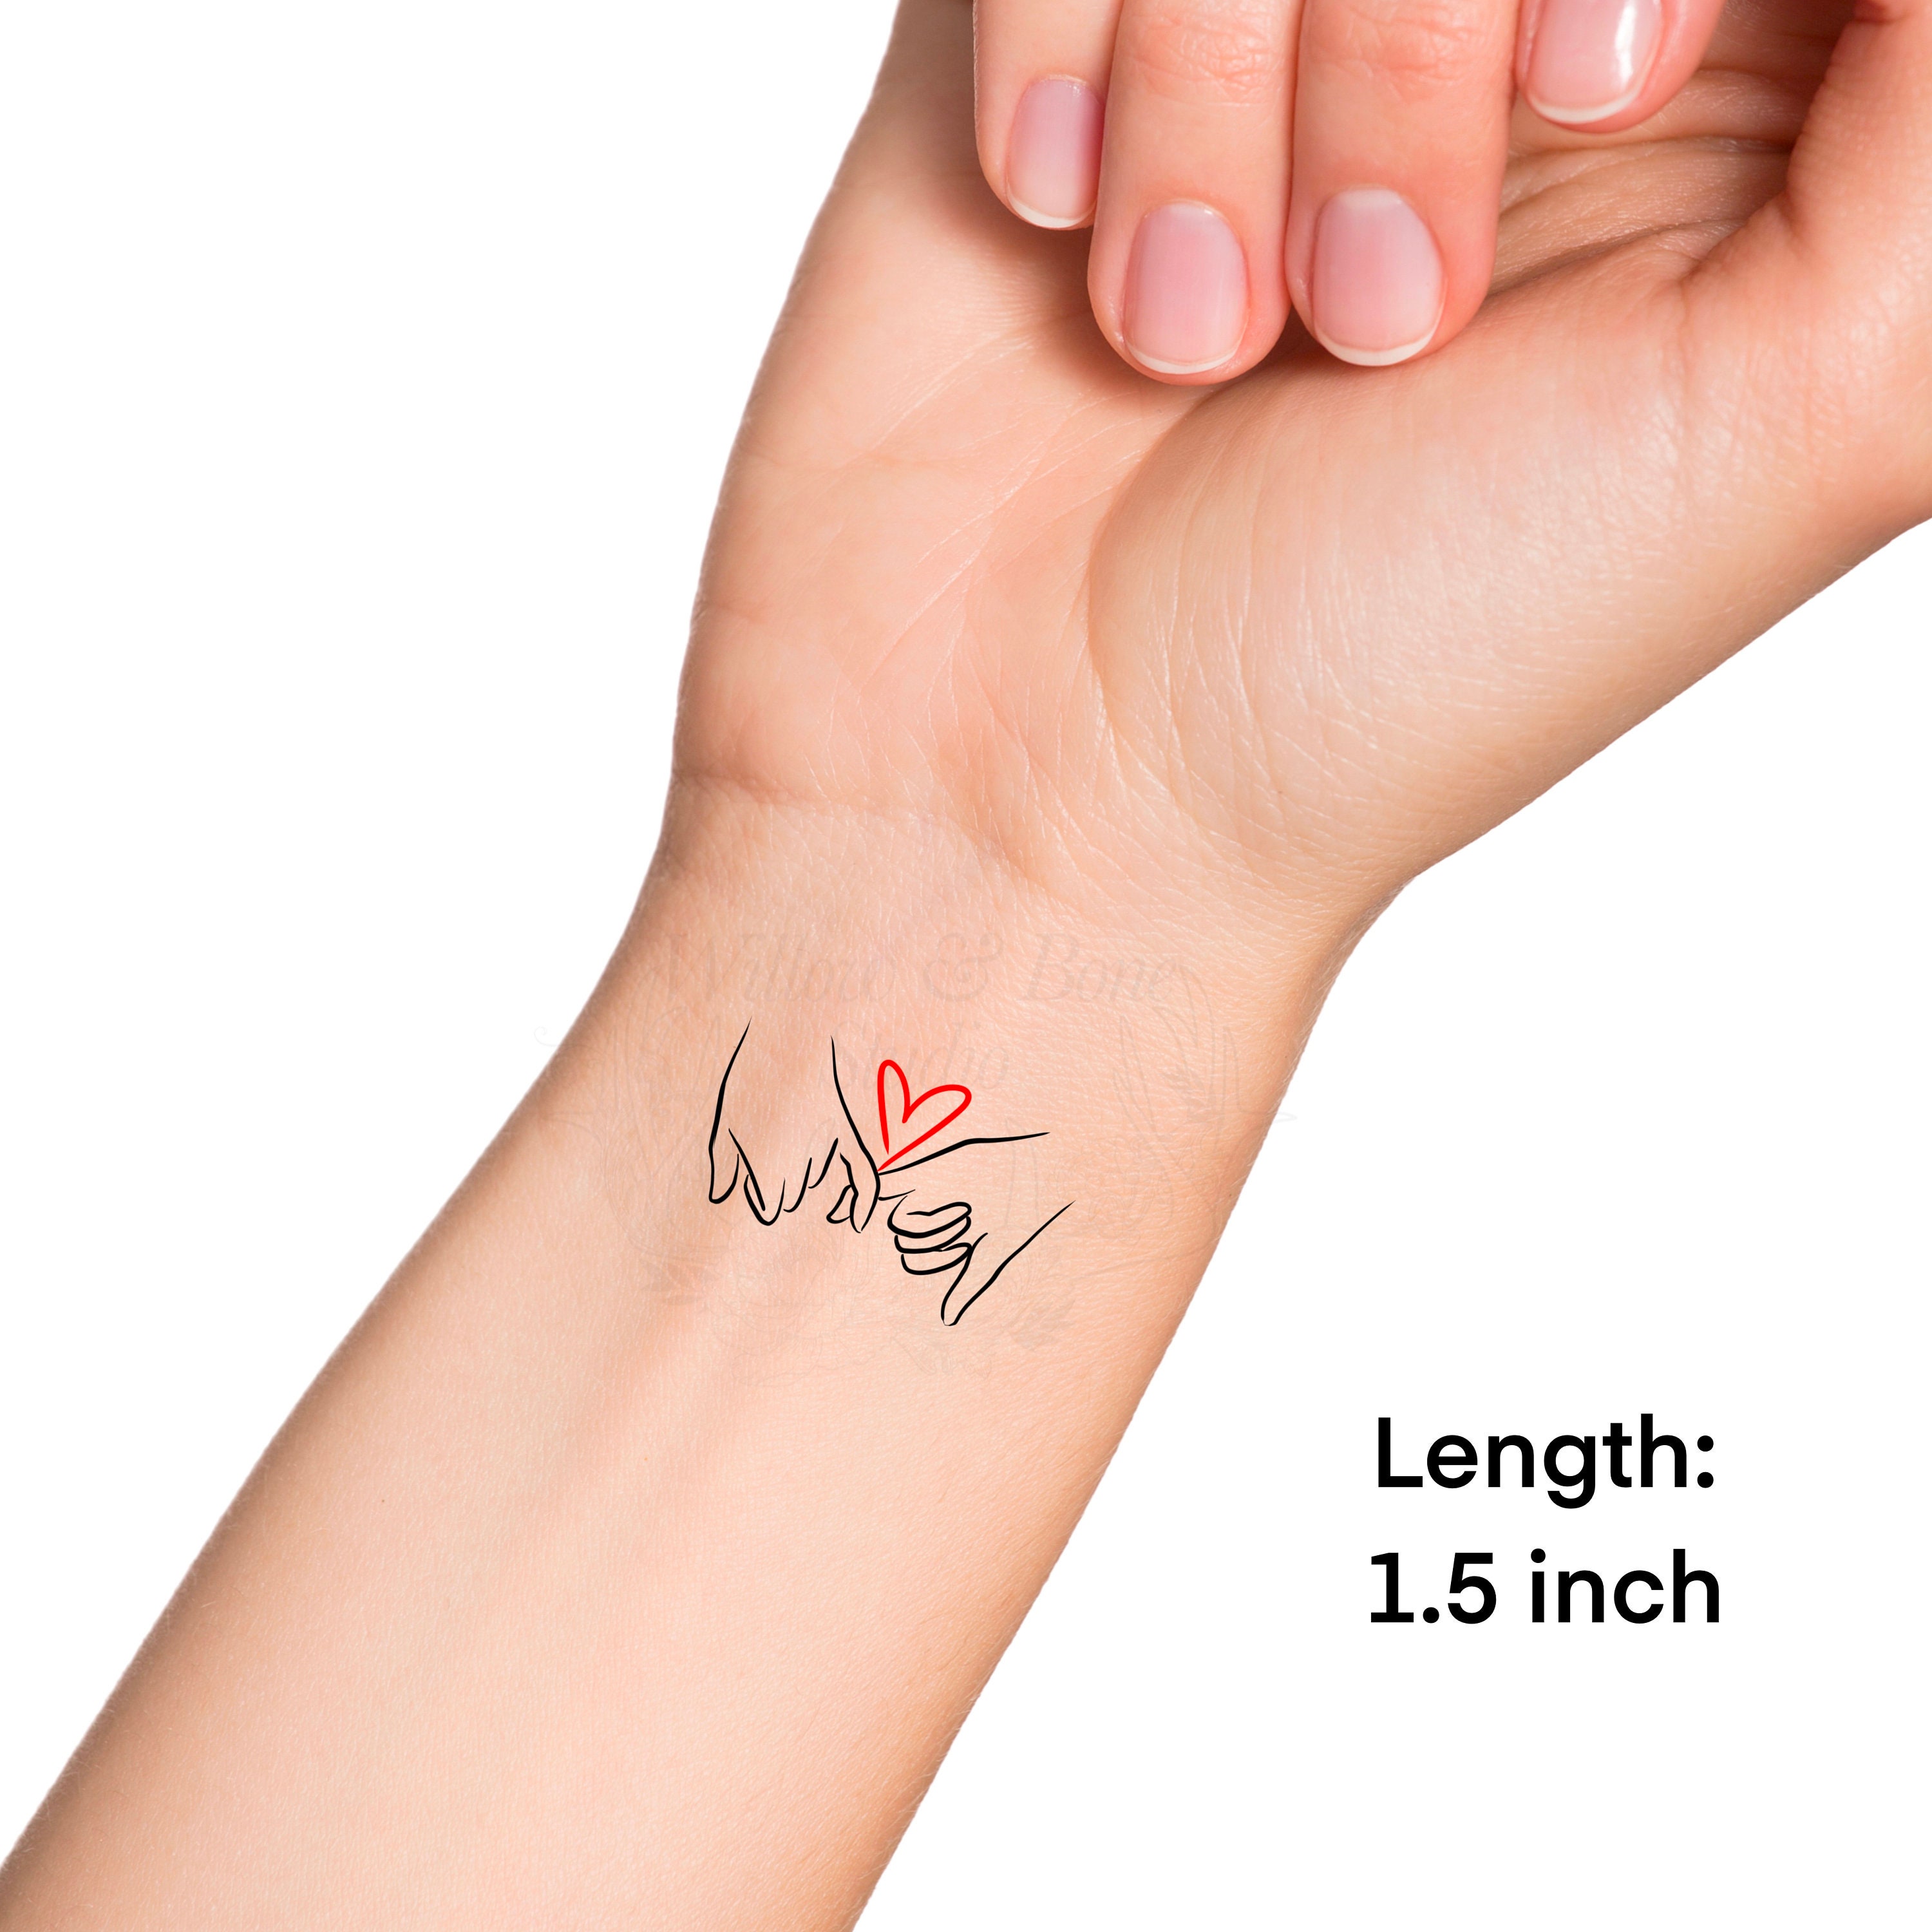 Amazon.com : Simply Inked Pinky Promise Temporary Tattoo, Designer  Temporary Tattoo for Girls Boys Men Women Waterproof Sticker Size: 2.5 x 4  inch l Black l : Beauty & Personal Care